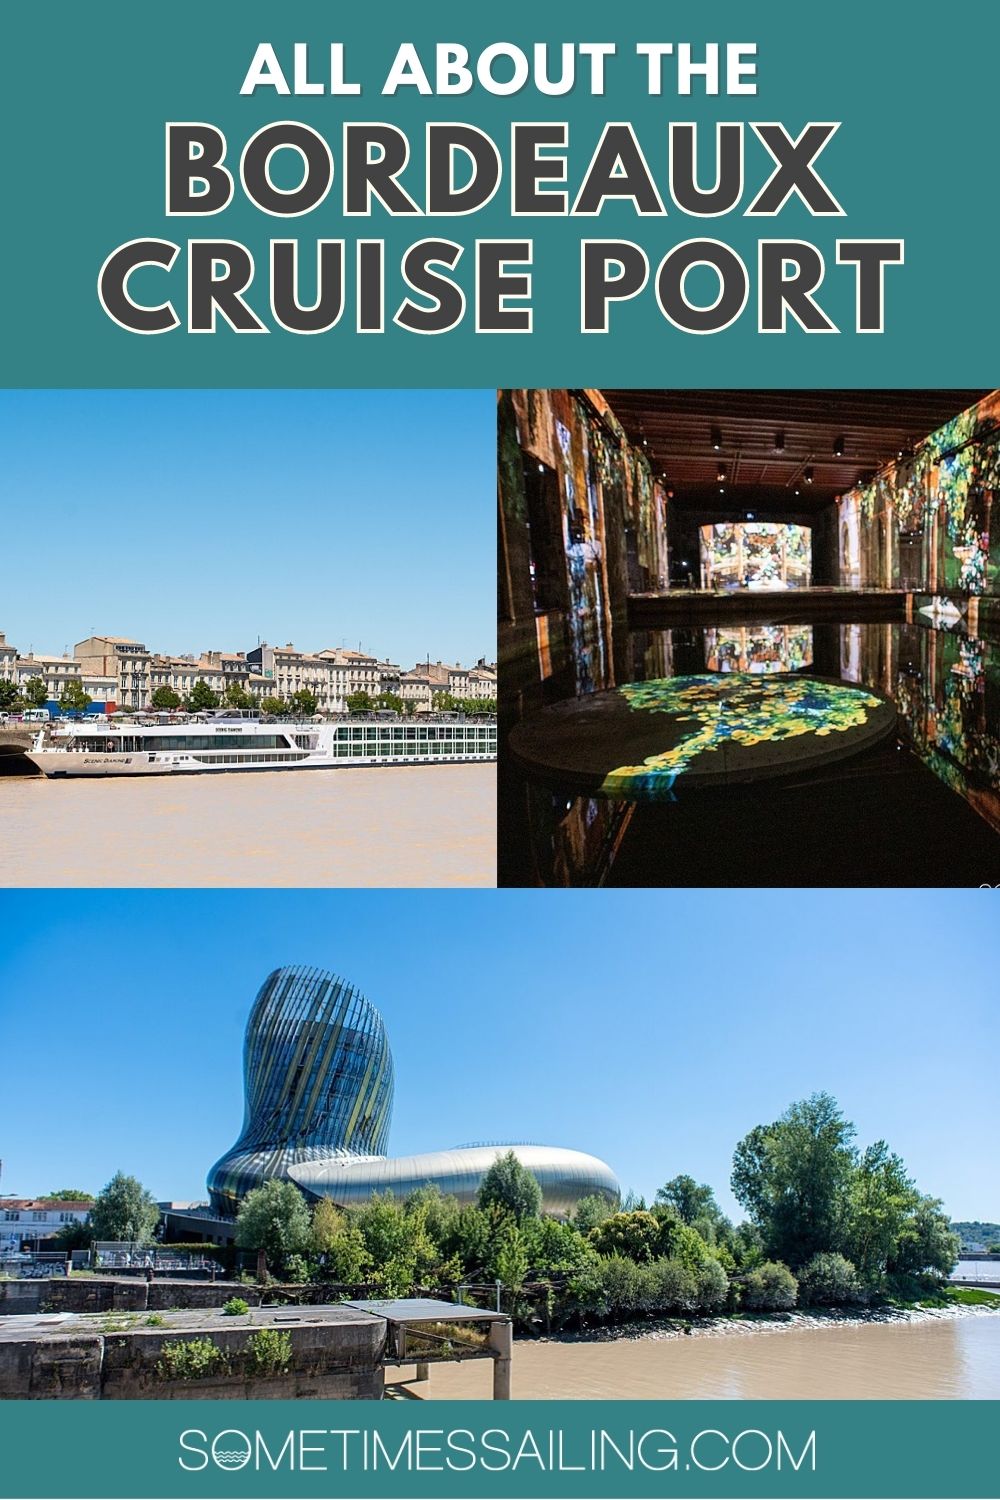 All About the Bordeaux Cruise Port for river cruises with photos of Bordeaux.